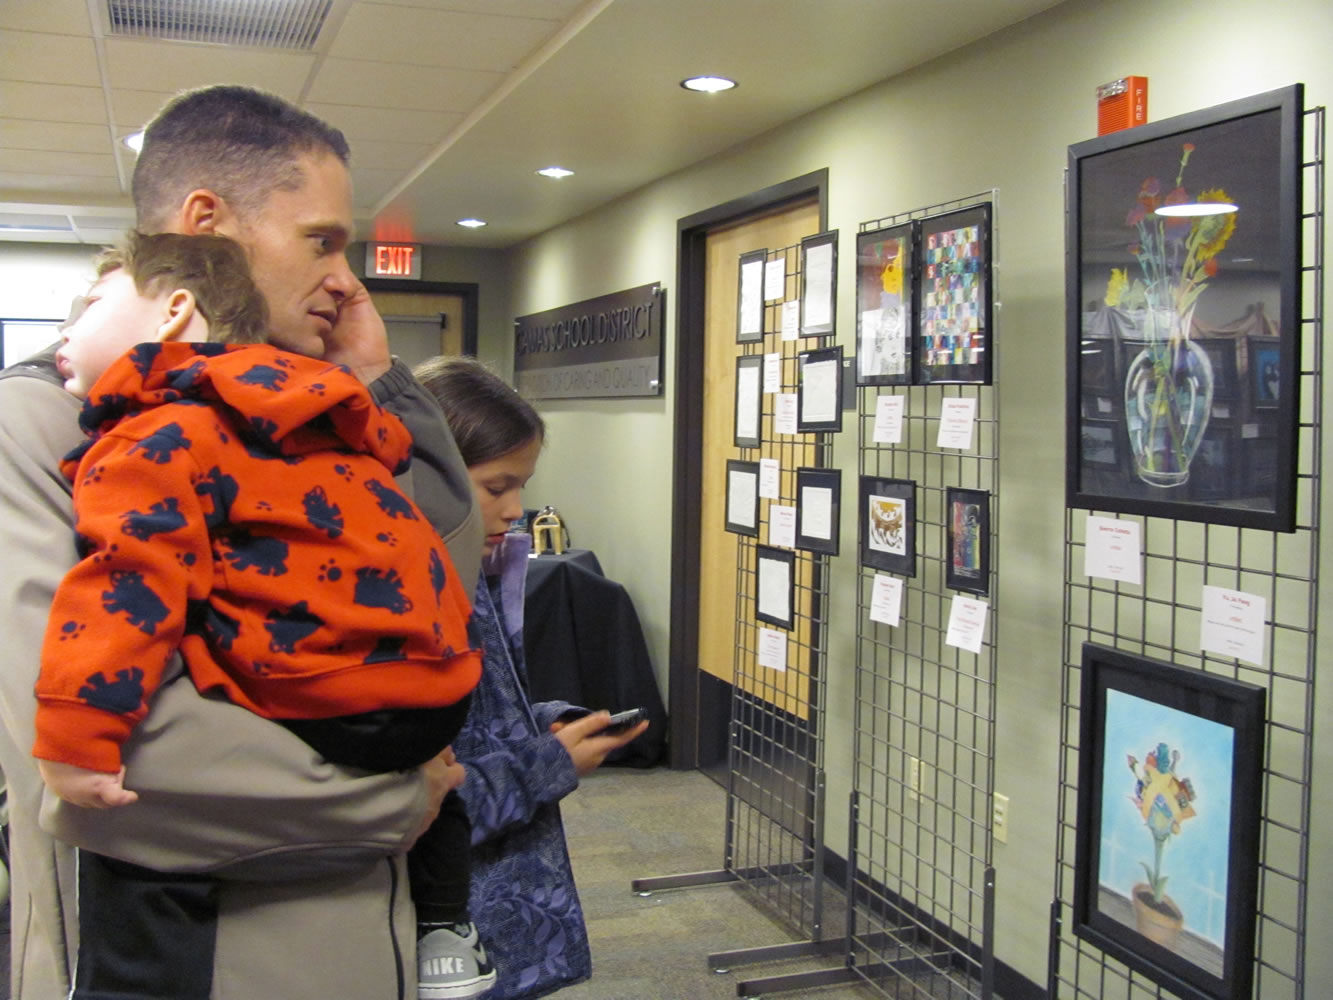 Jeff Snell, Camas School District assistant superintendent, listens to students describe their work at the CHS art show via a recording by dialing a specific number associated with each piece.